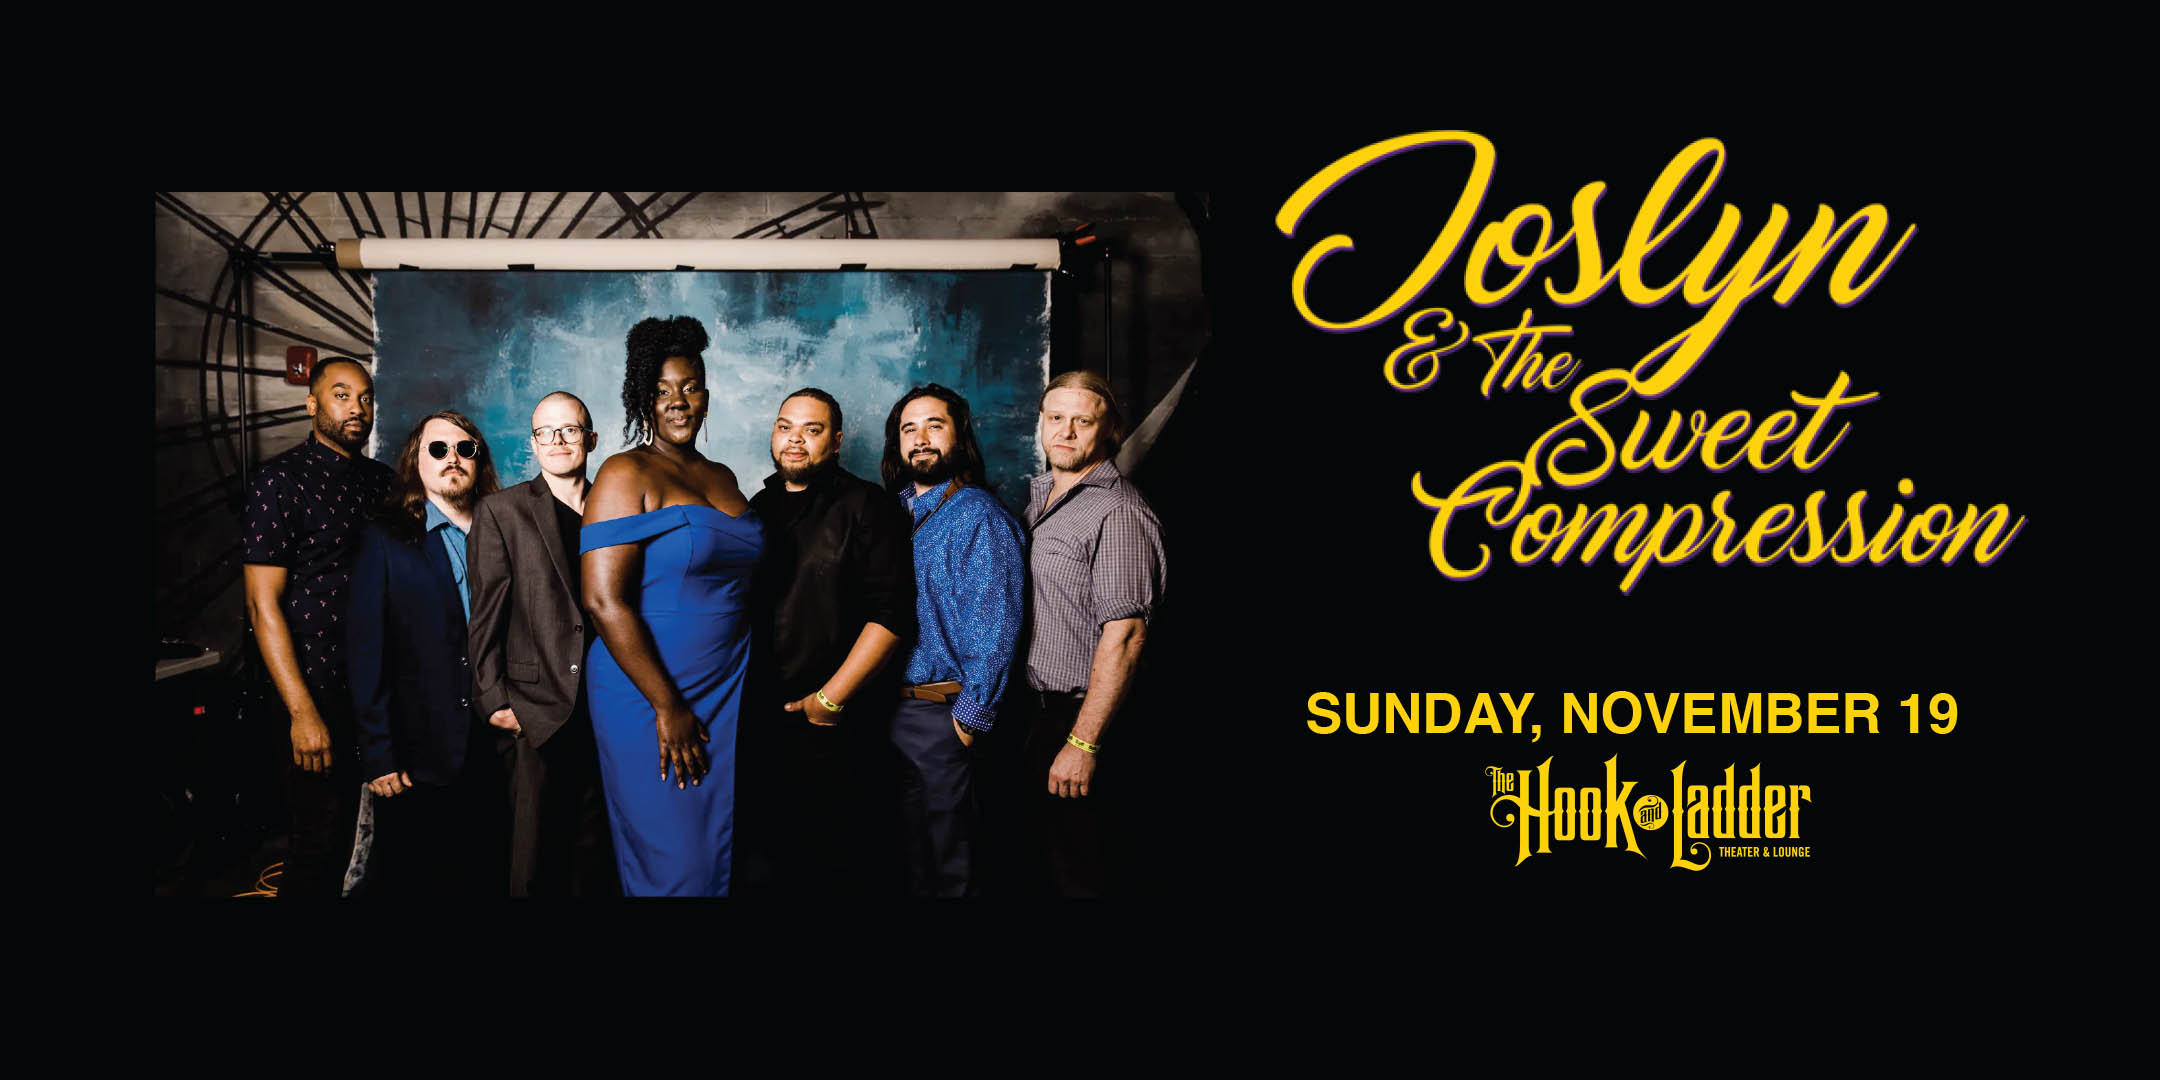 An Evening with Joslyn & The Sweet Compression Sunday, November 19 The Hook and Ladder Theater $15 ADV / $20 DOS Doors 7:30pm :: Music 8:00pm (If you care the Vikings game will also be on in the lounge...)